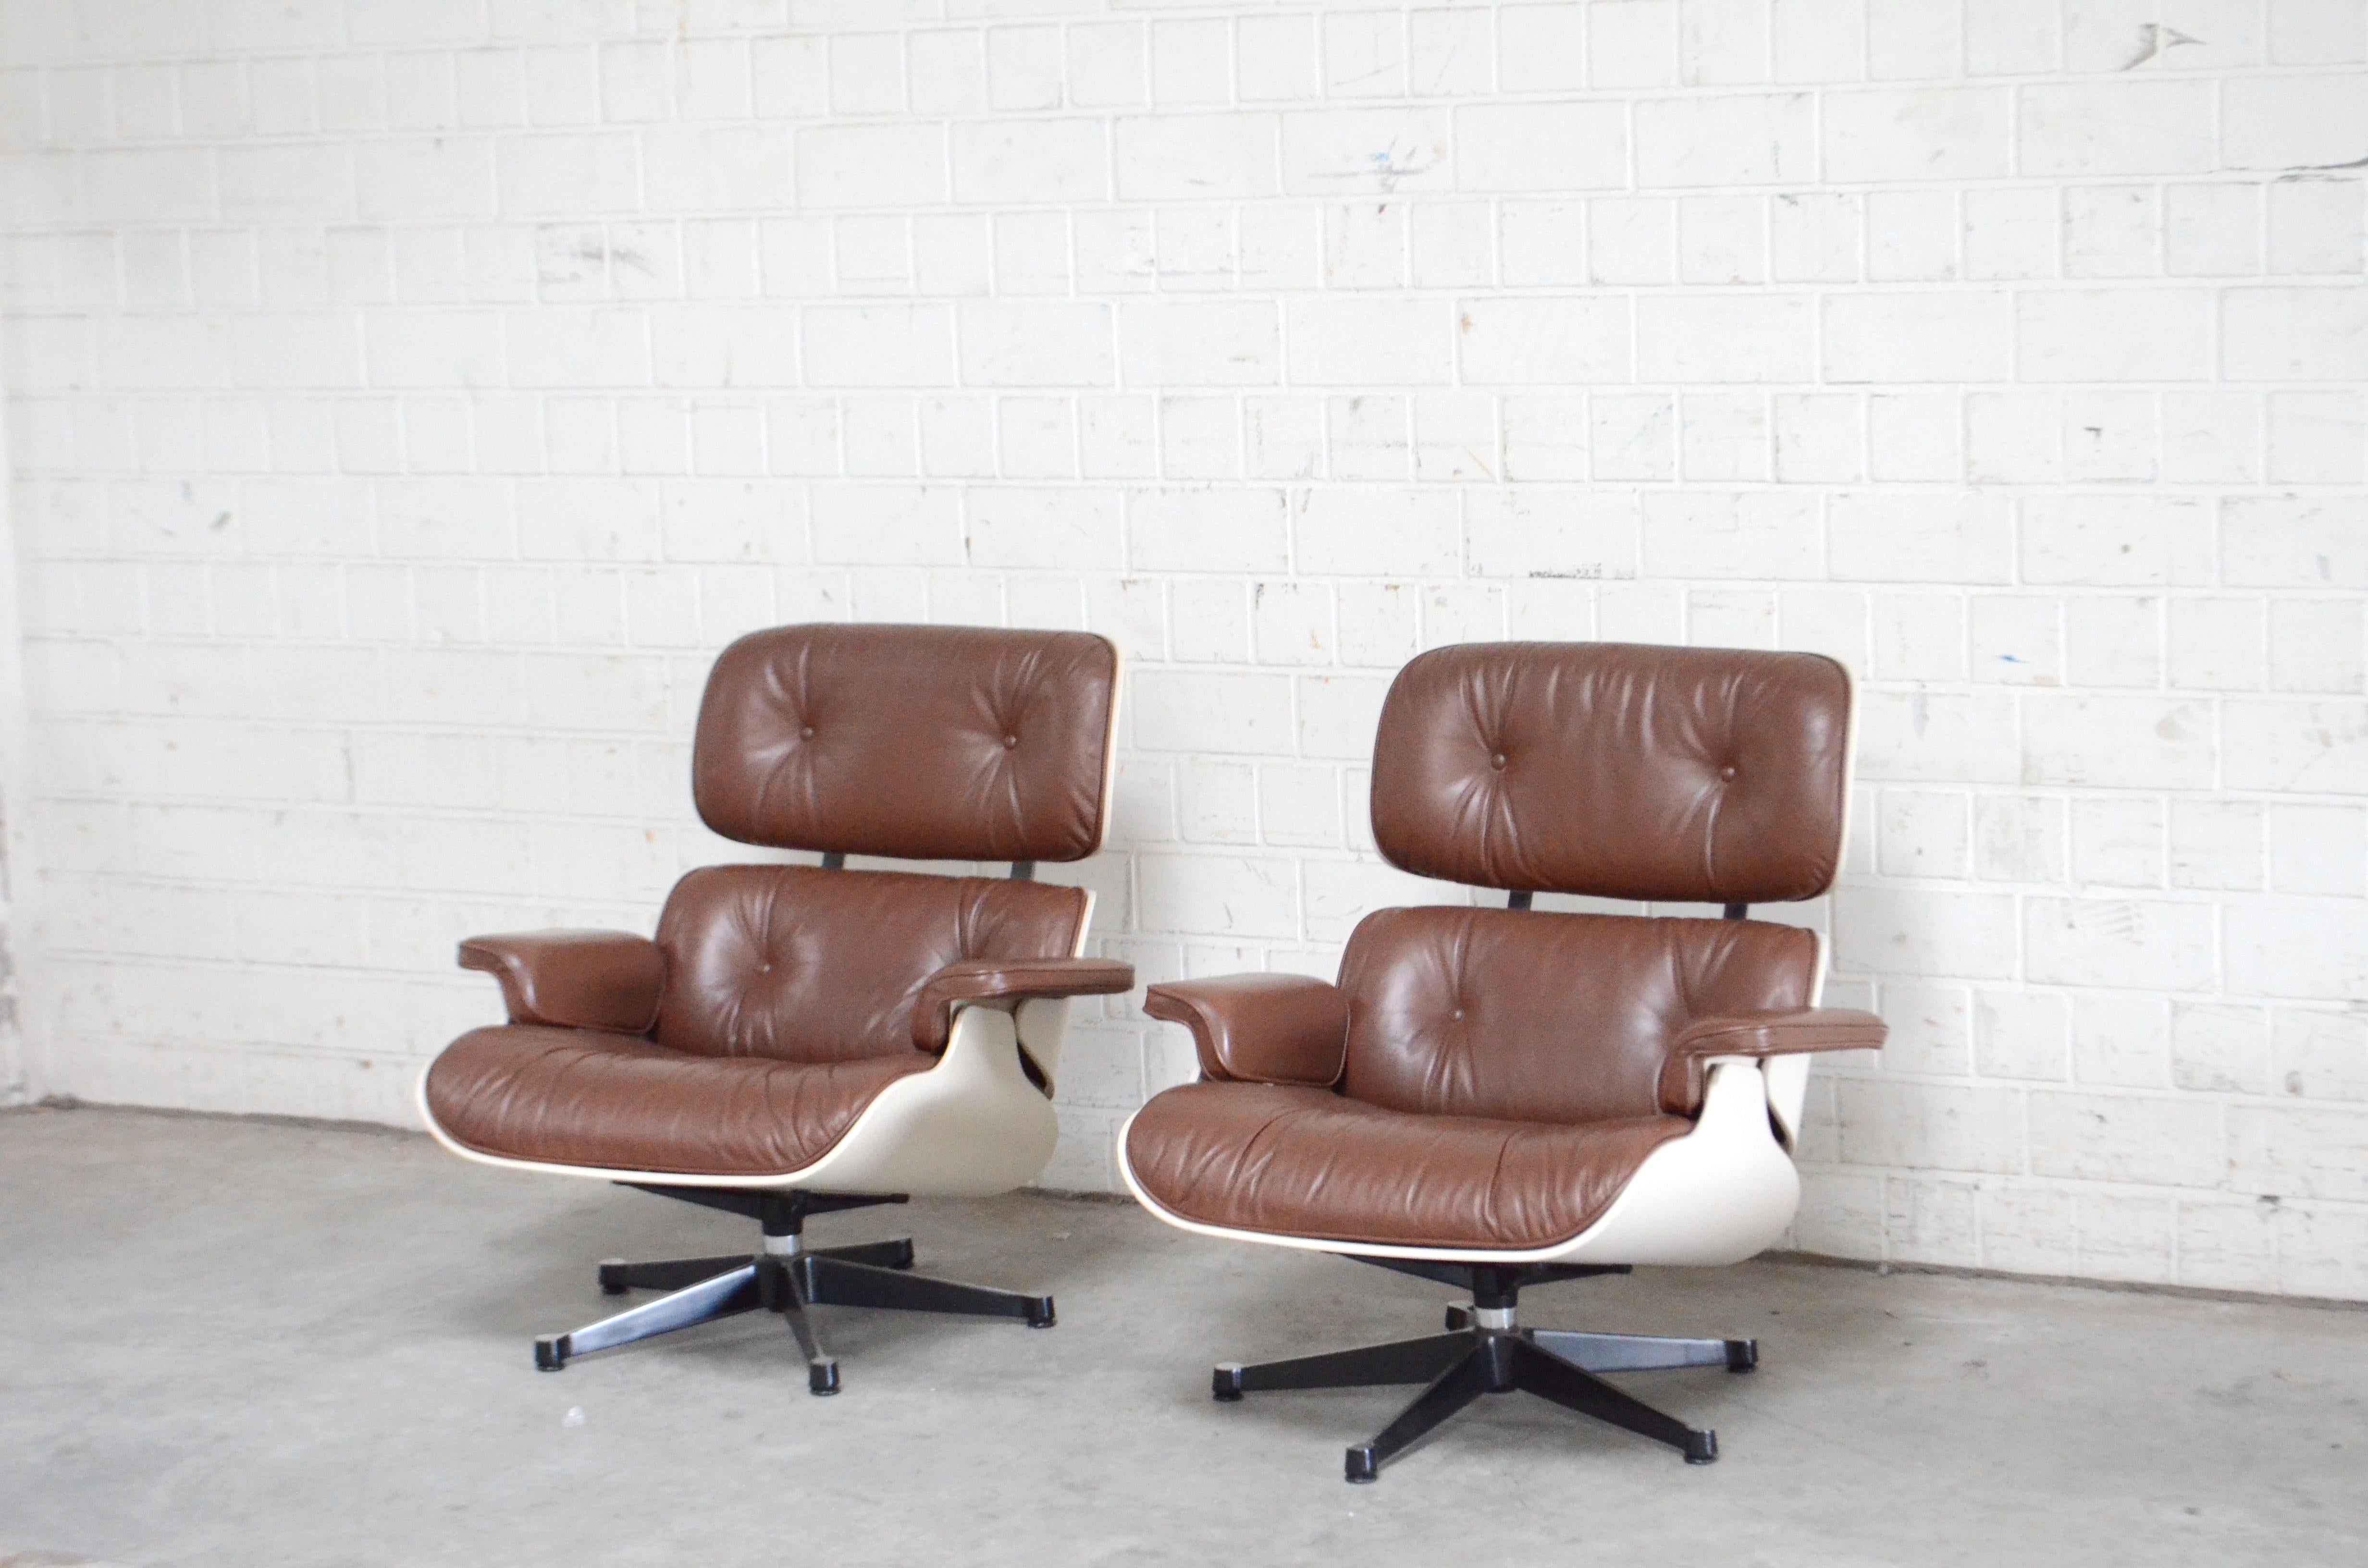 Vitra Eames Lounge Chair Cognac Brown and White Shell, Set of 2 For Sale 12